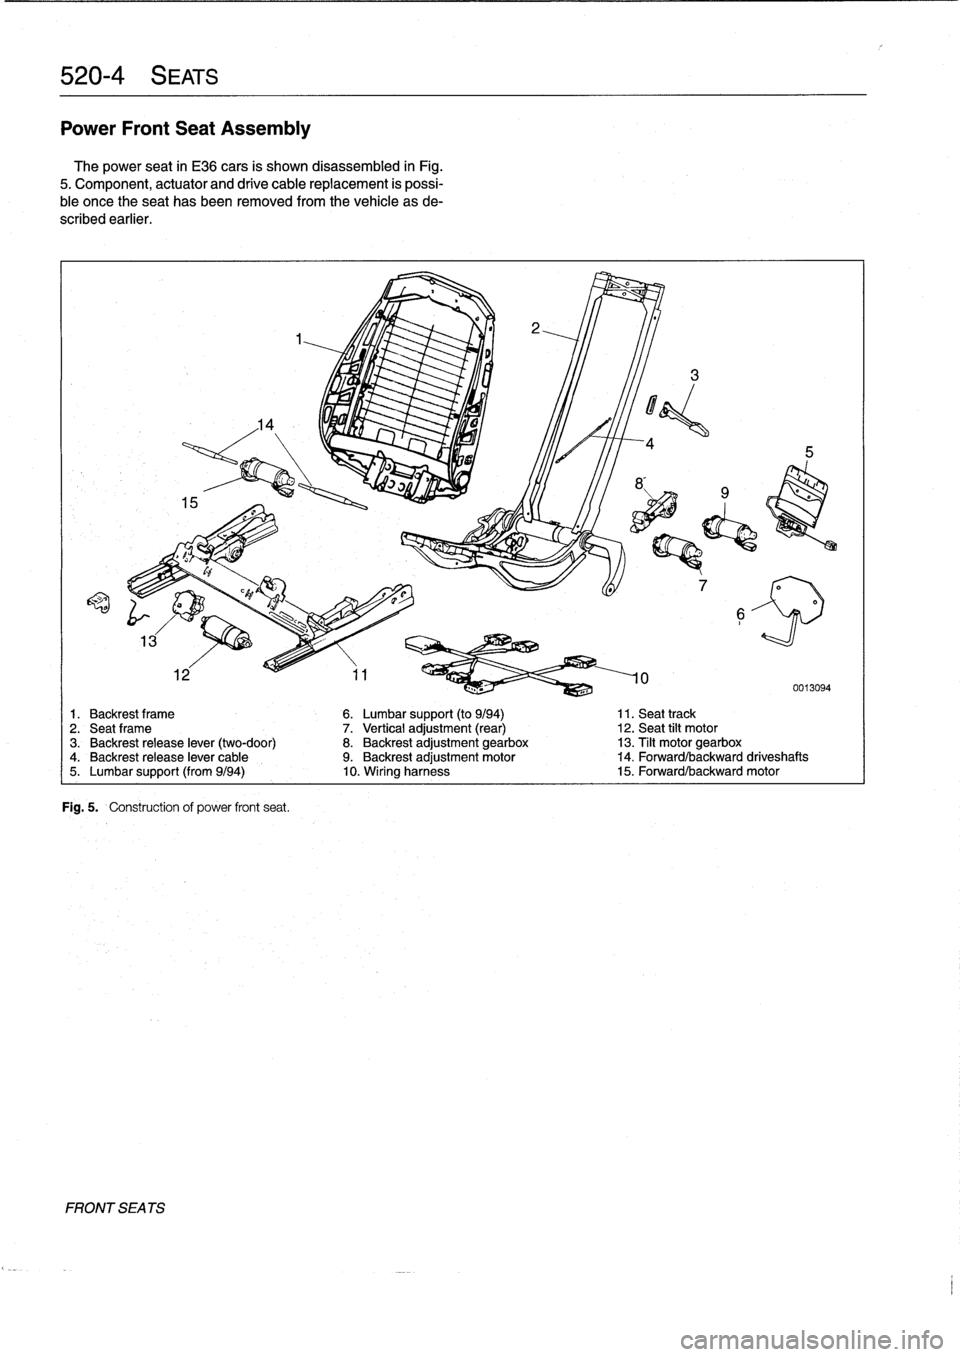 BMW 318i 1996 E36 Workshop Manual 
520-
4
SEATS

Power
Front
Seat
Assembly
The
power
seat
in
E36
cars
is
shown
disassembled
in
Fig
.

5
.
Component,
actuator
and
drive
cable
replacement
is
possi-
ble
once
theseat
has
been
removed
from